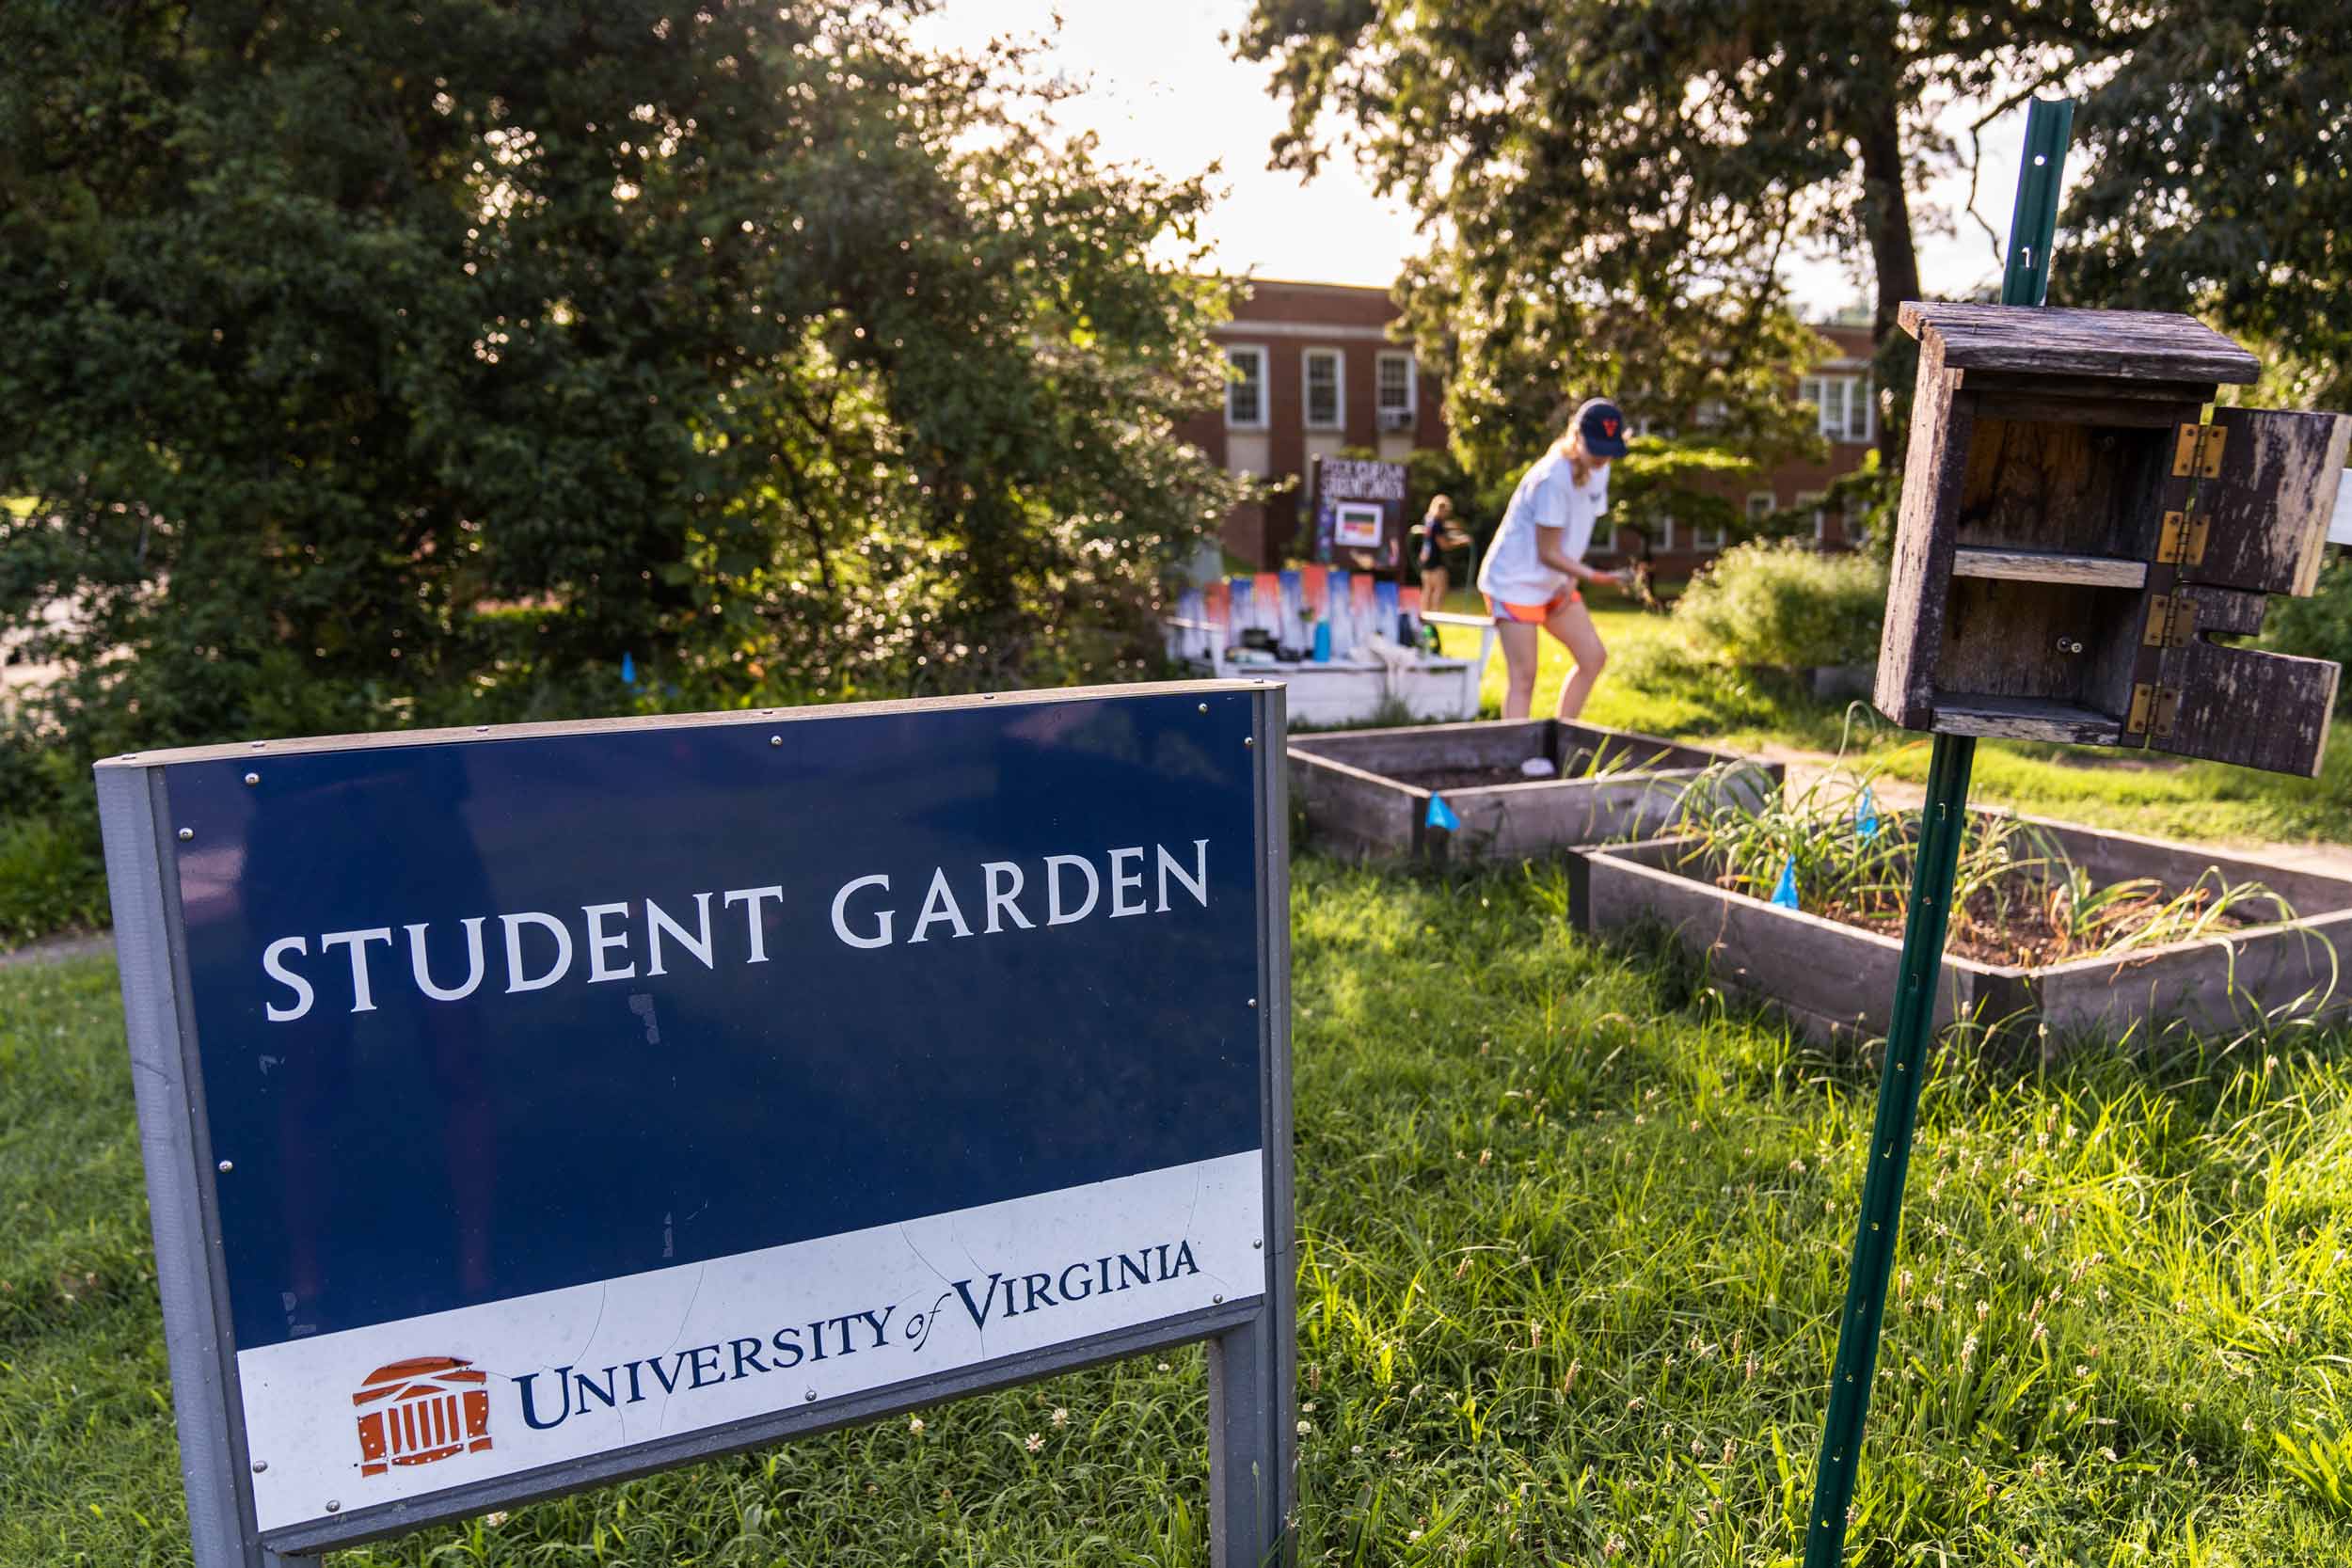 A sign at an intersection identifies the area as the Student Gardens.